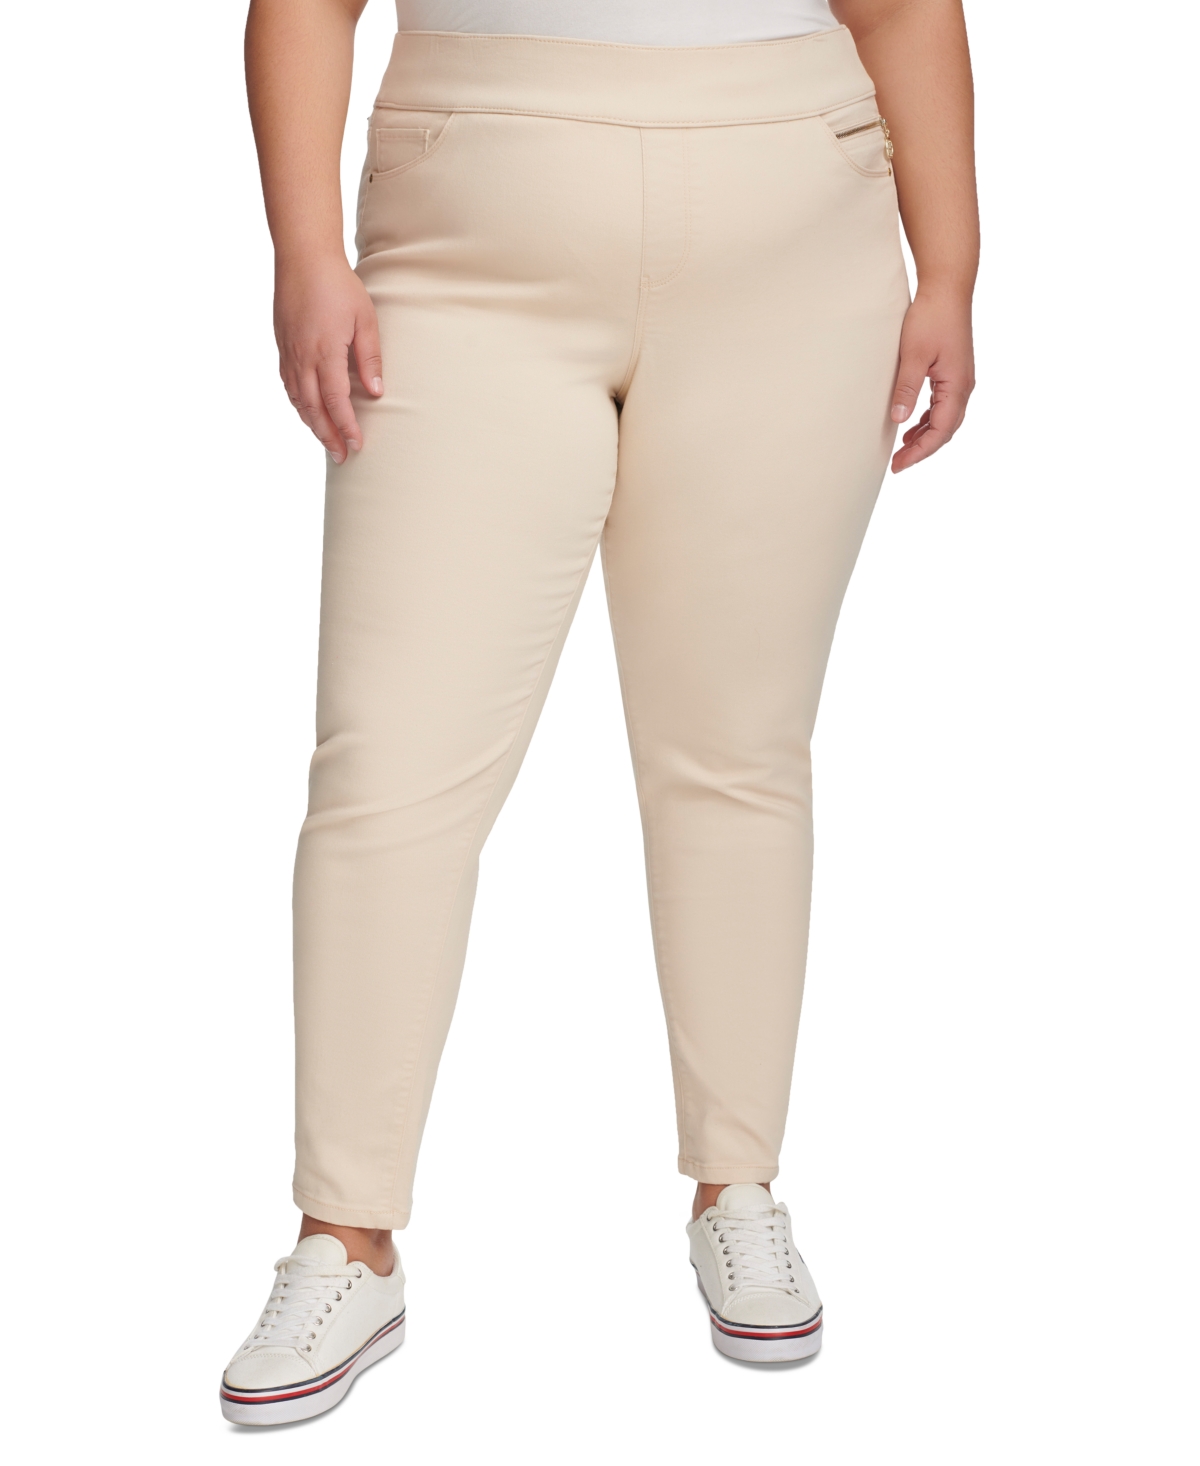 Plus Size Gramercy Sateen Ankle Pants, Created for Macy's - Pirouette